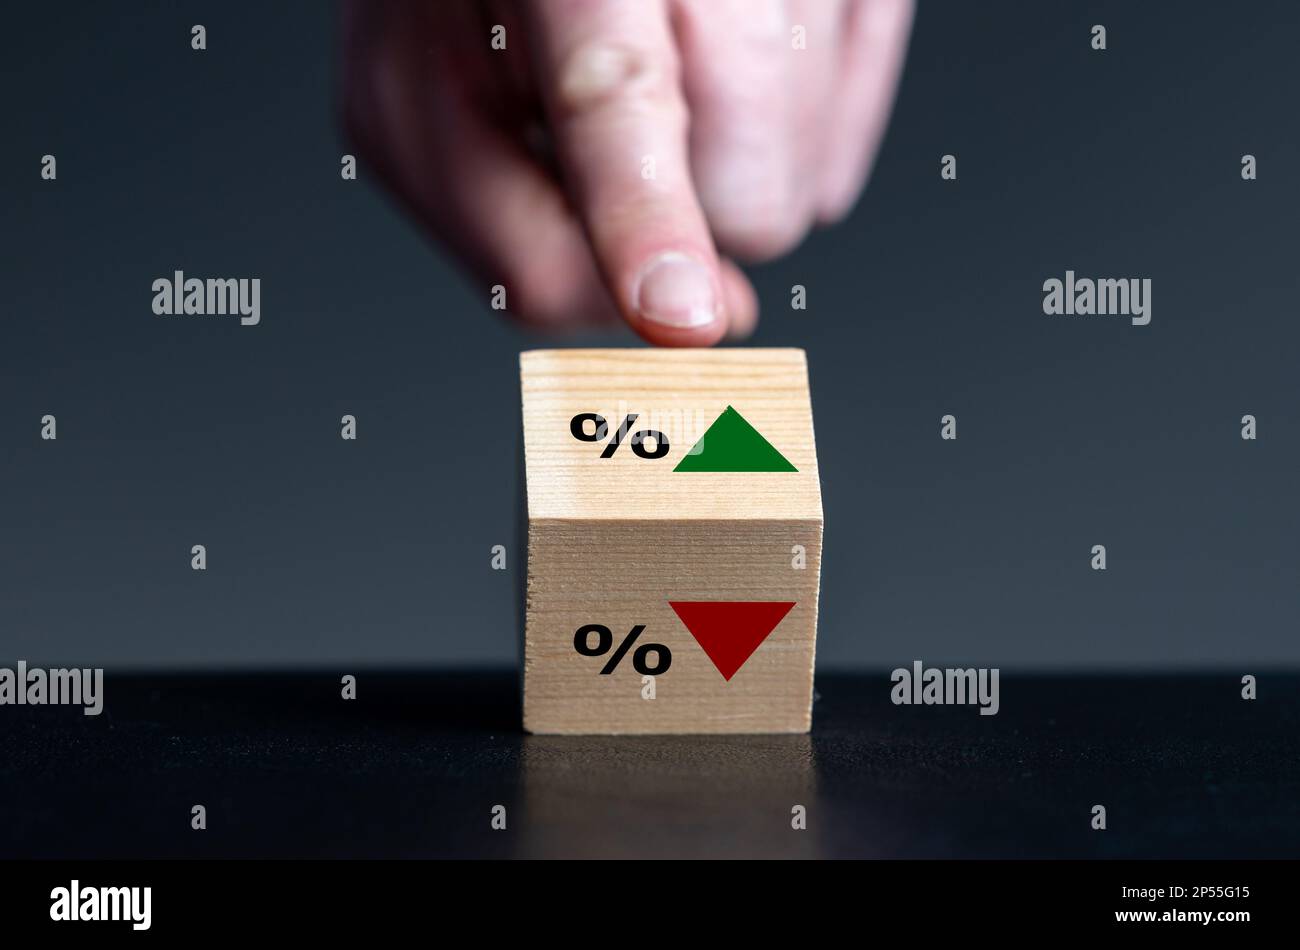 Symbol for the trend of the interest rate. Hand turns wooden cube and changes the orientation of an arrow from down to up. Stock Photo